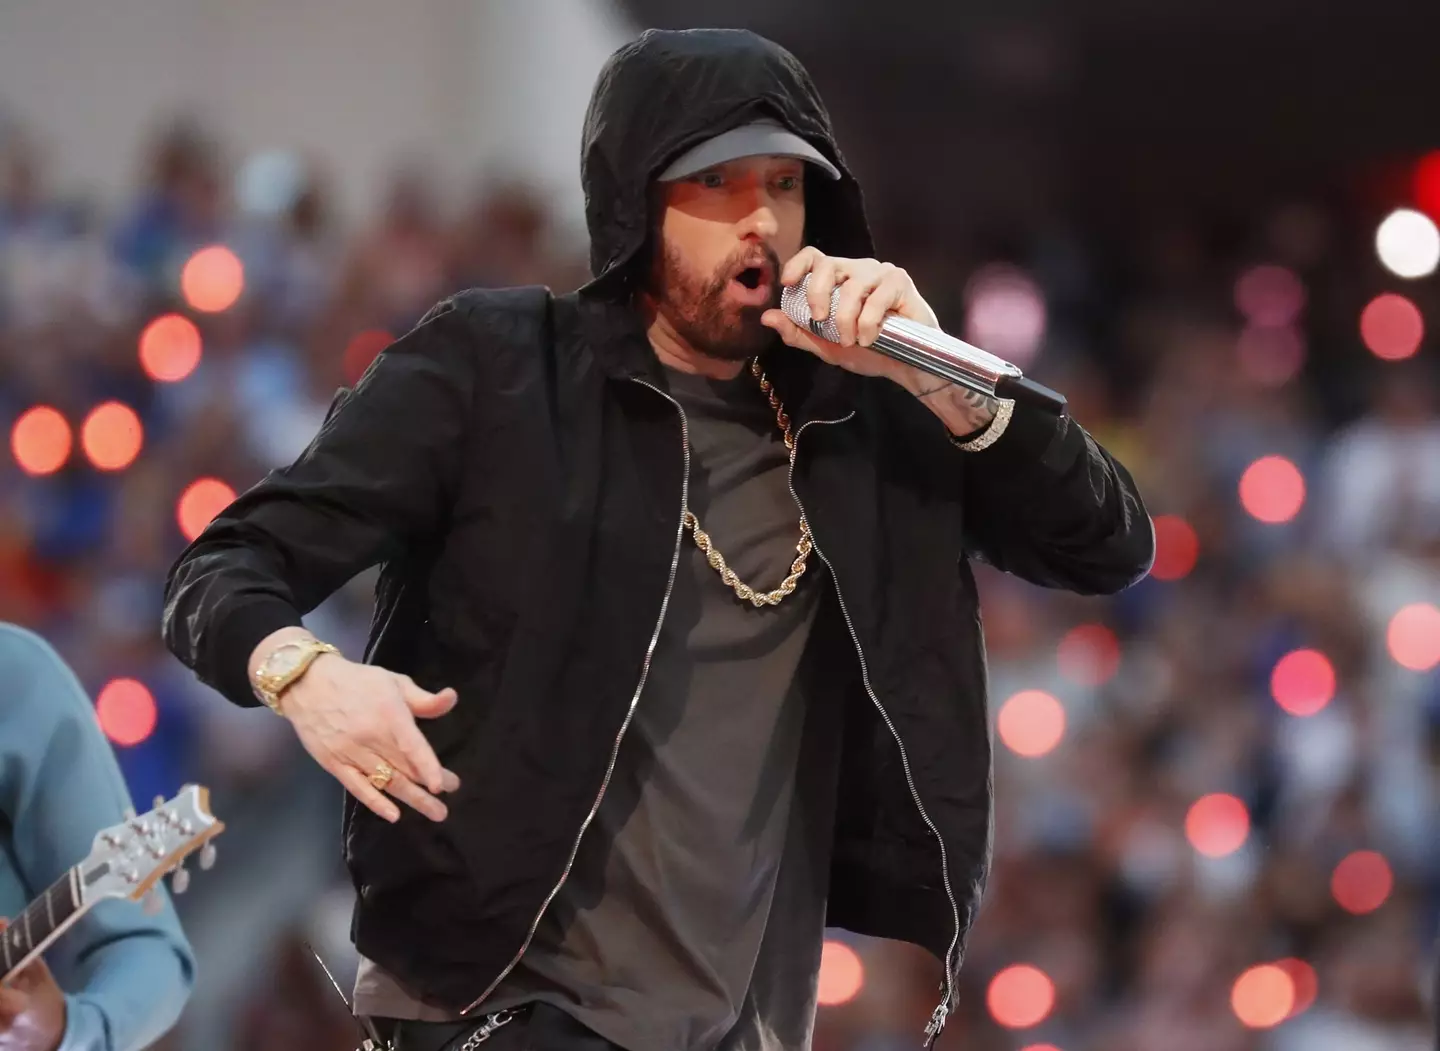 Eminem had amazing response after finding out Billie Eilish was terrified of him.